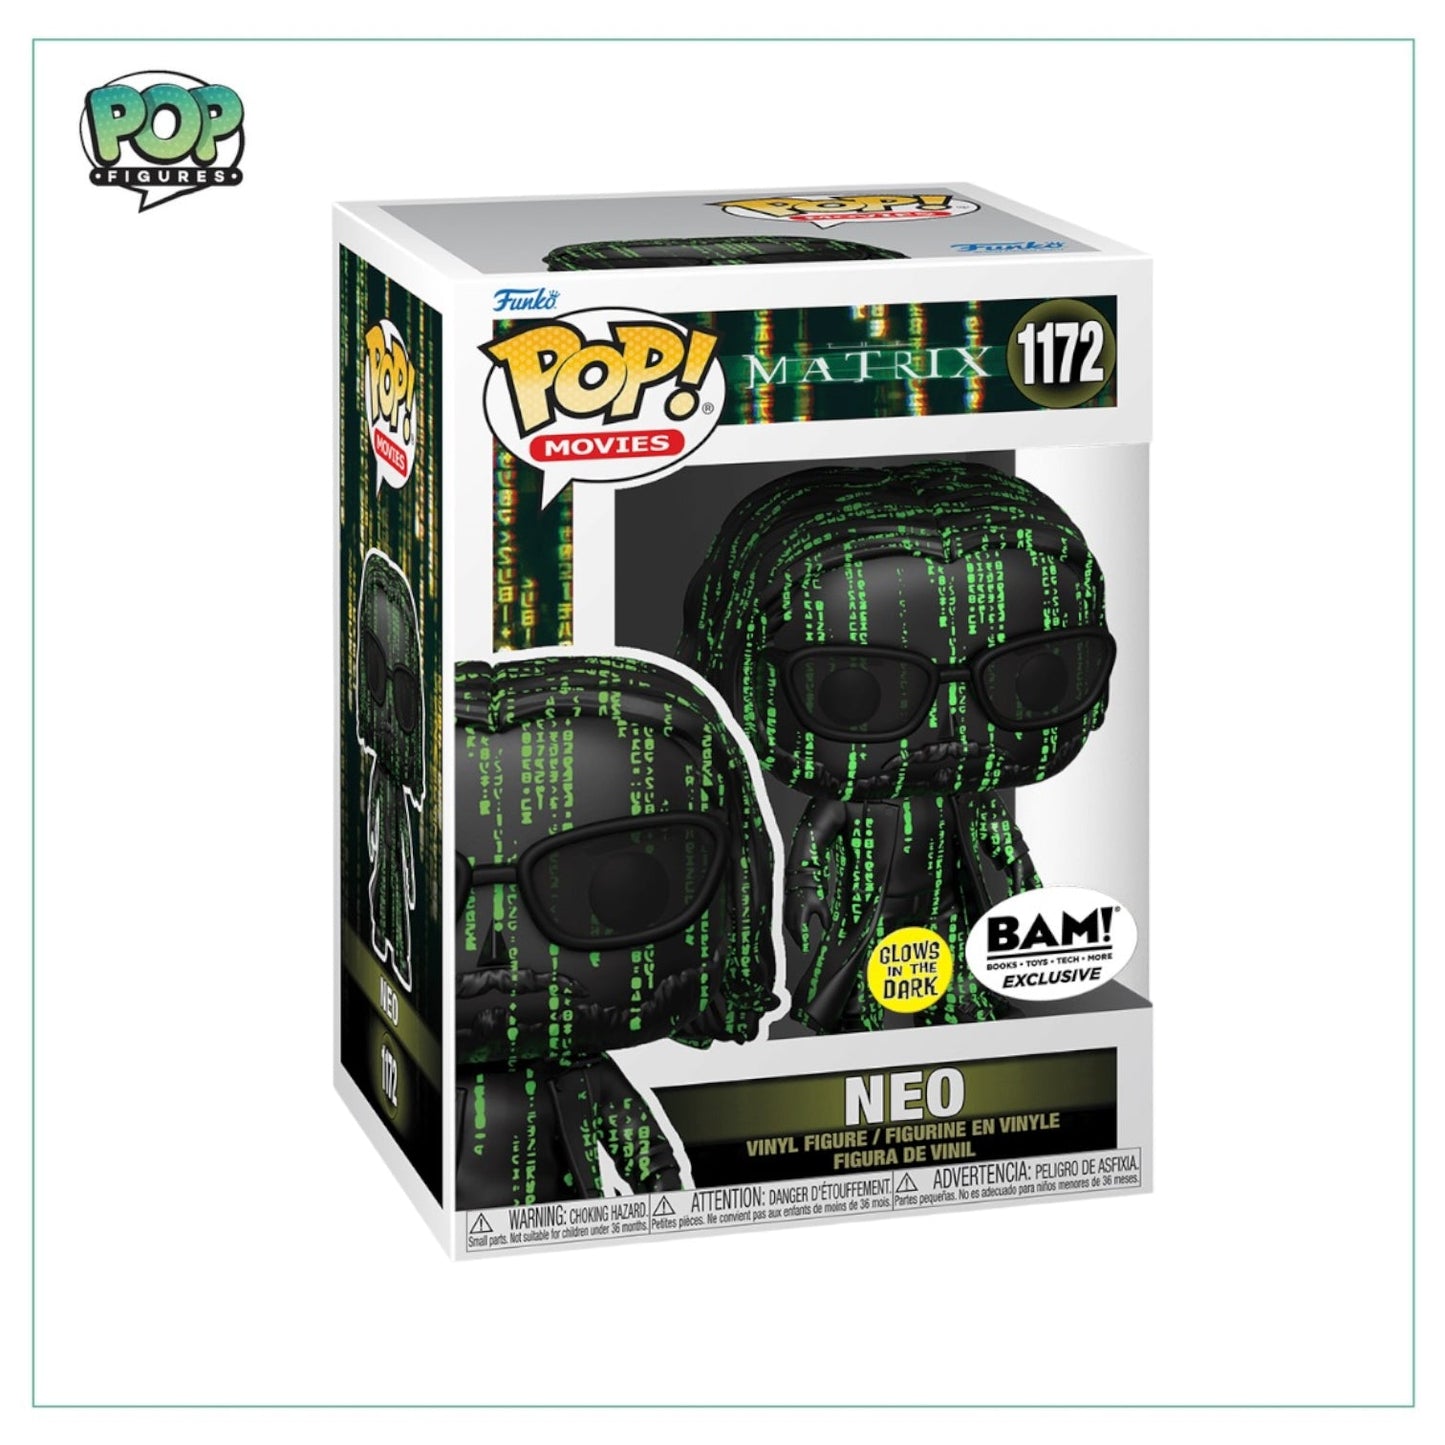 Neo #1172 Funko Pop! - The Matrix  - Glows in the Dark - BAM! Exclusive - Angry Cat